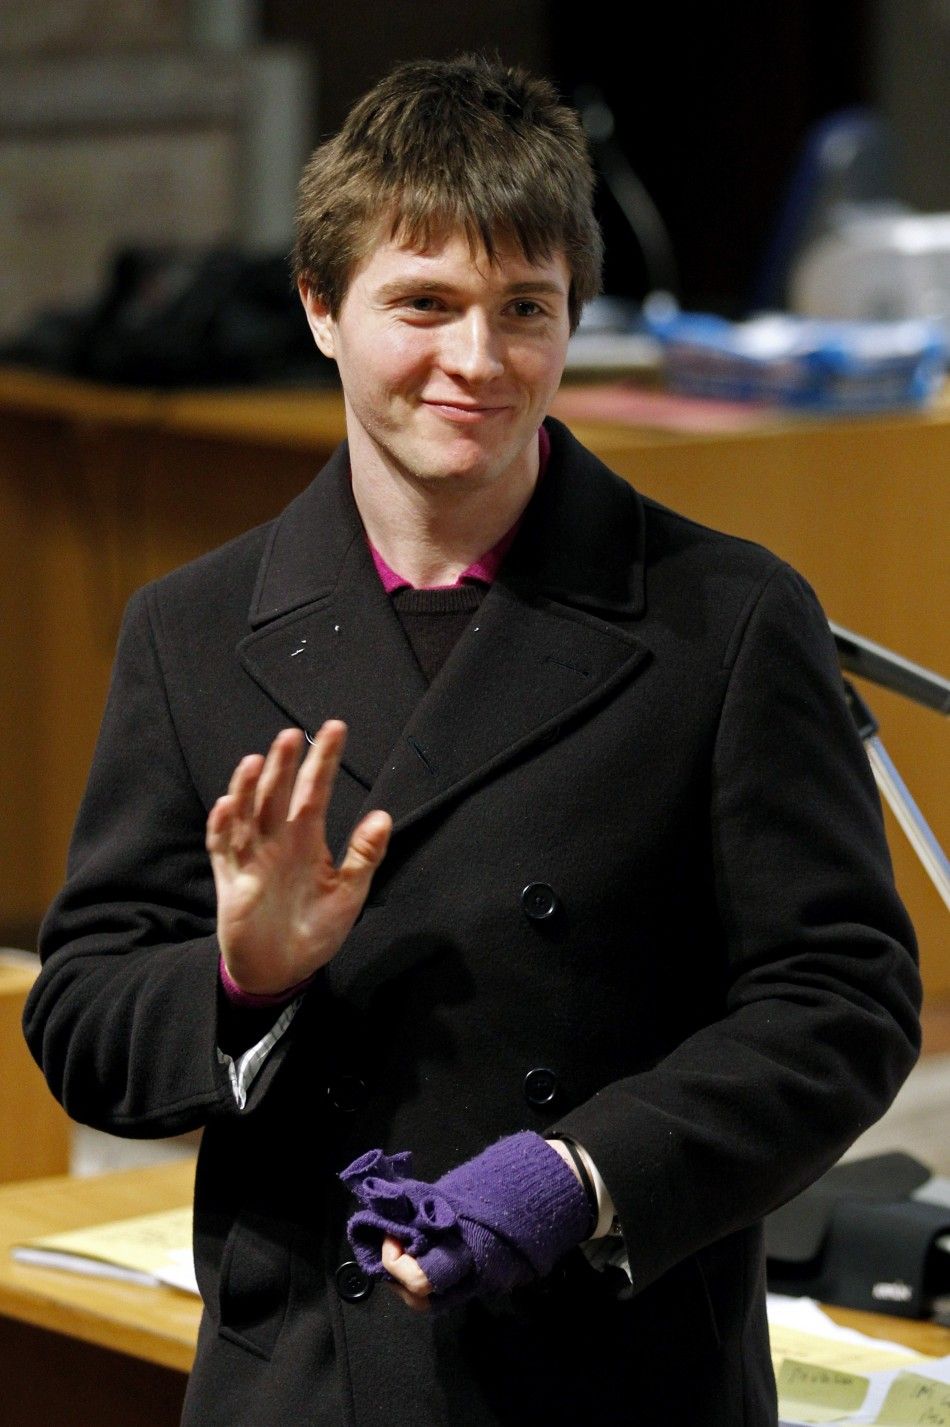 Raffaele Sollecito, the Italian student convicted of killing his British flatmate in Italy three years ago, waves as he returns to the courtroom after a break during a trial session in Perugia 